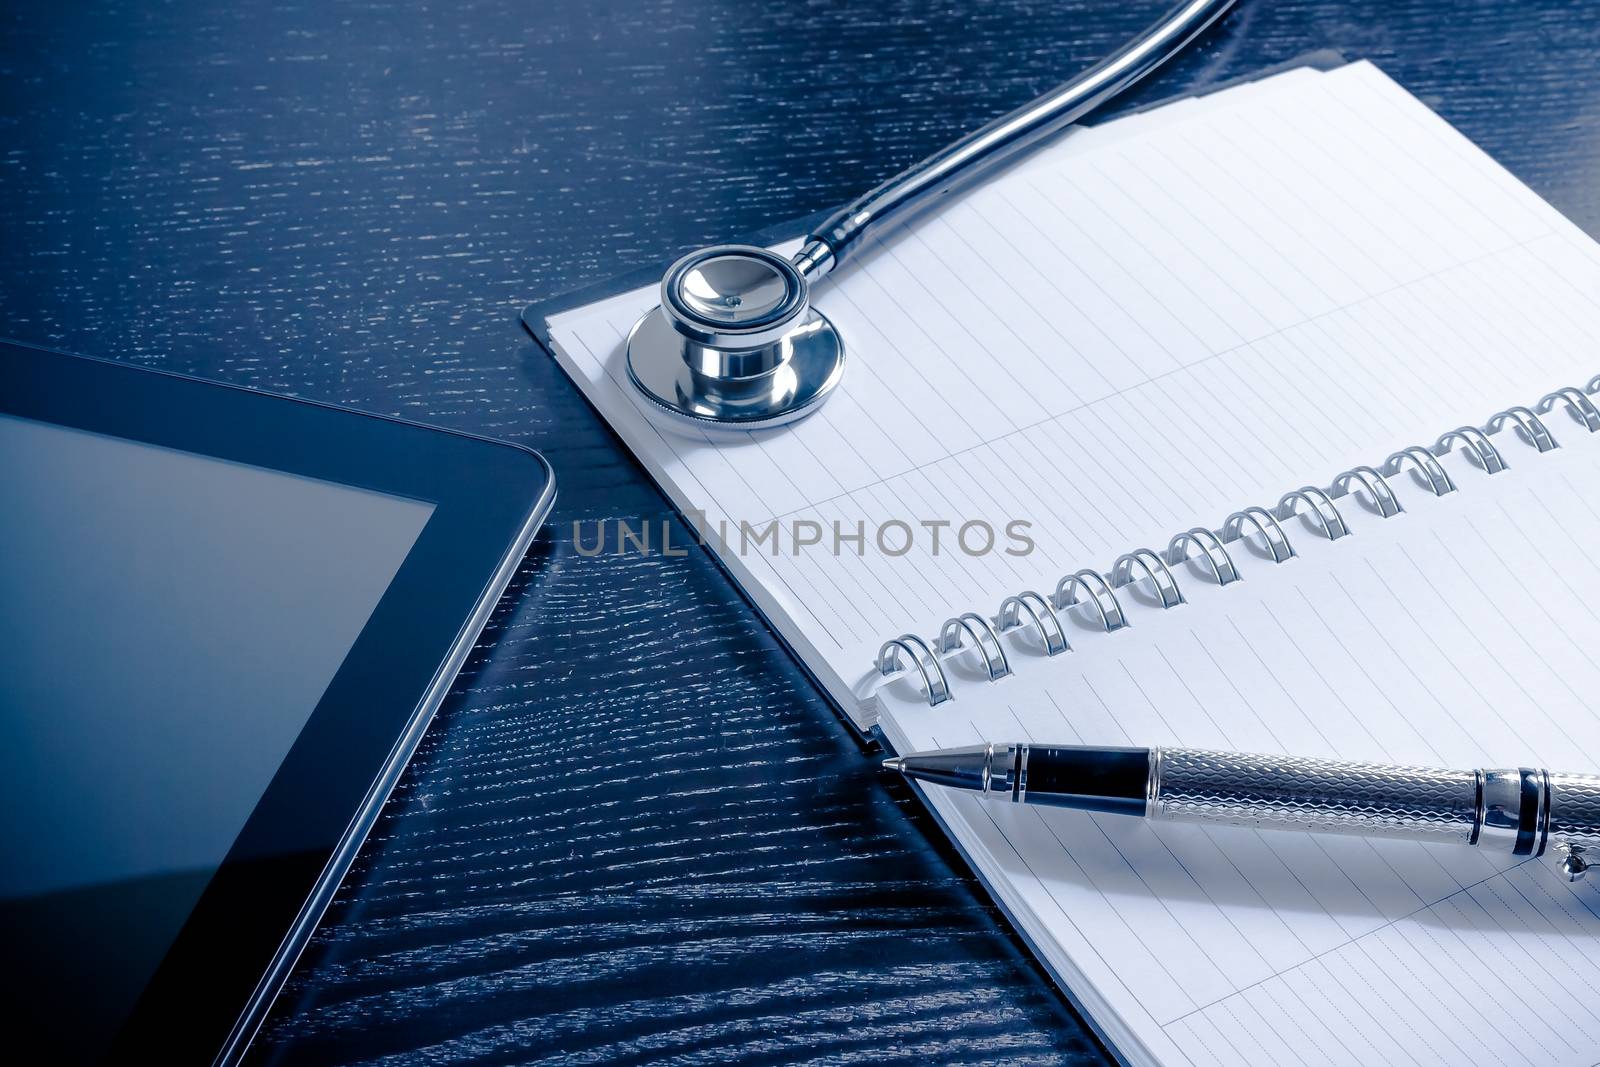 stethoscope on notes near modern digital tablet pc on wood table. Concept of medical or research theme